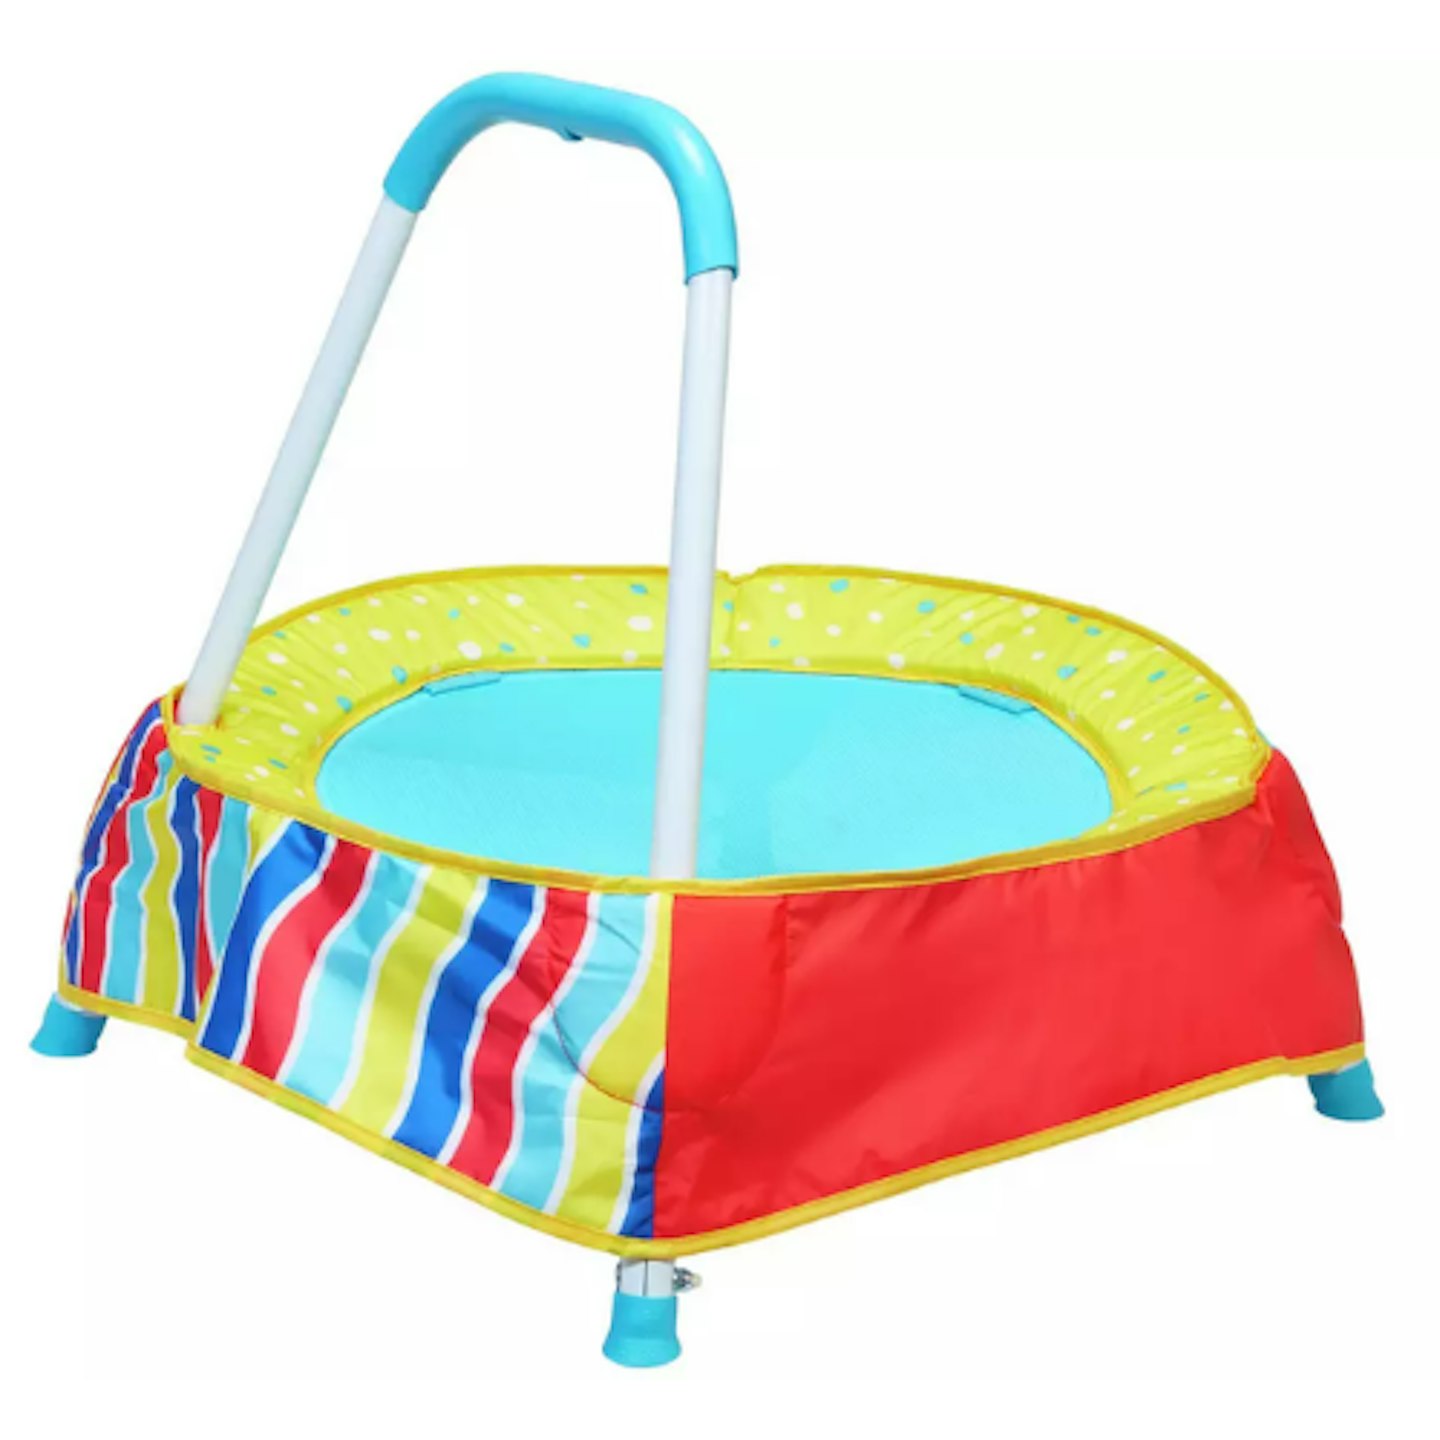 Chad Valley Toddler 2 Ft. Trampoline